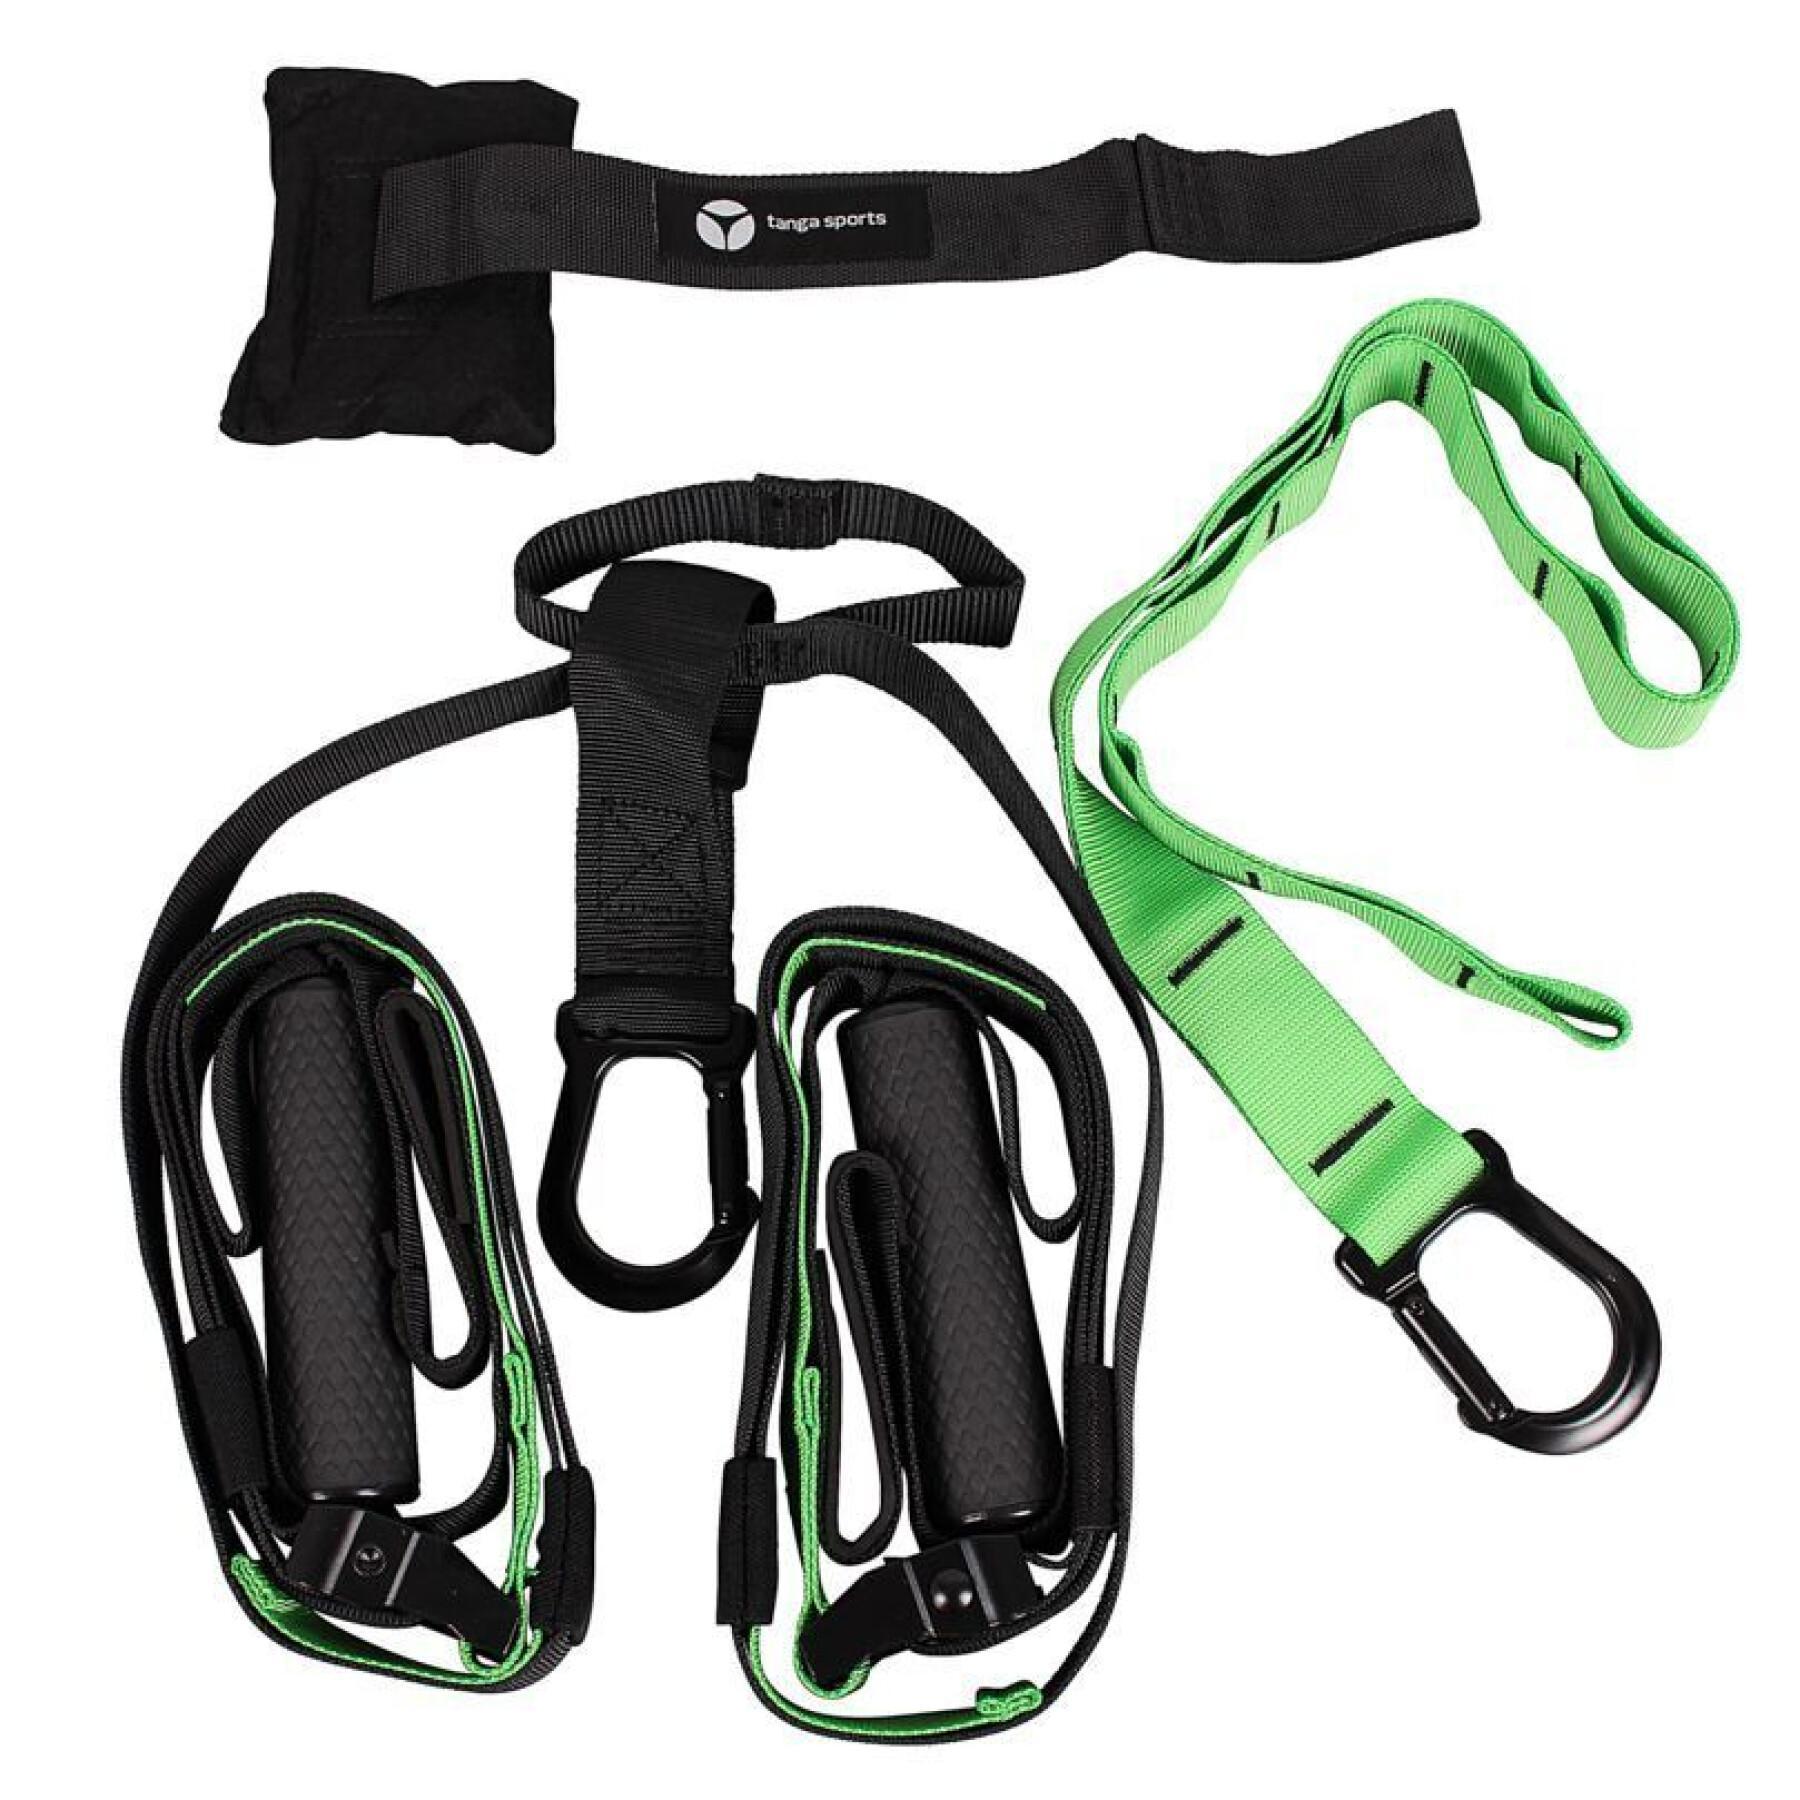 Suspension strap Tanga sports Sling Trainer PRO - Fitness and